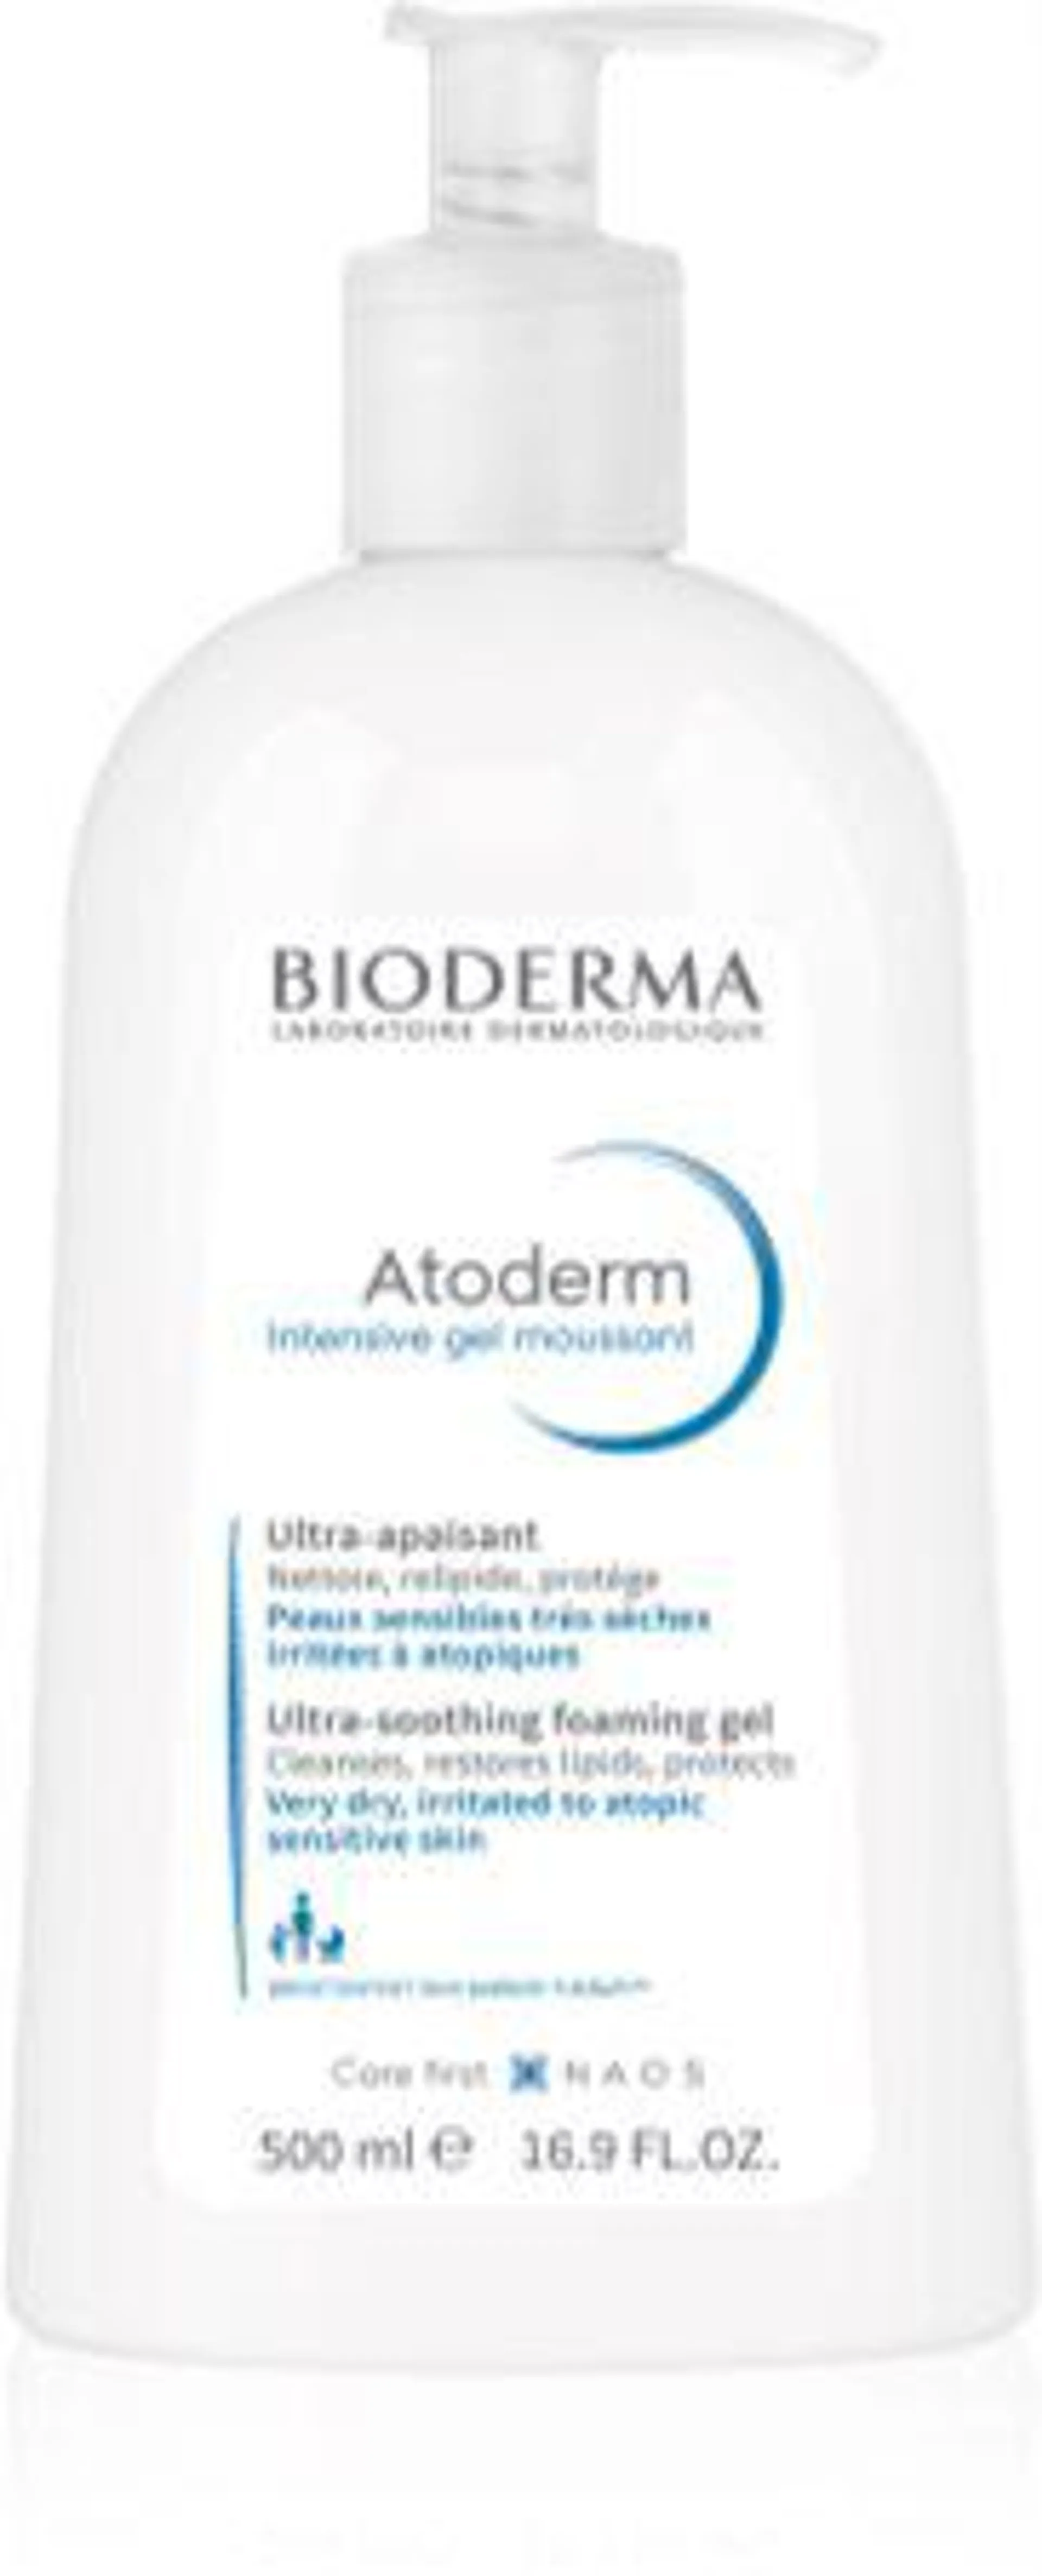 Bioderma Atoderm Intensive Gel Moussant nourishing foaming gel for very dry sensitive and atopic skin